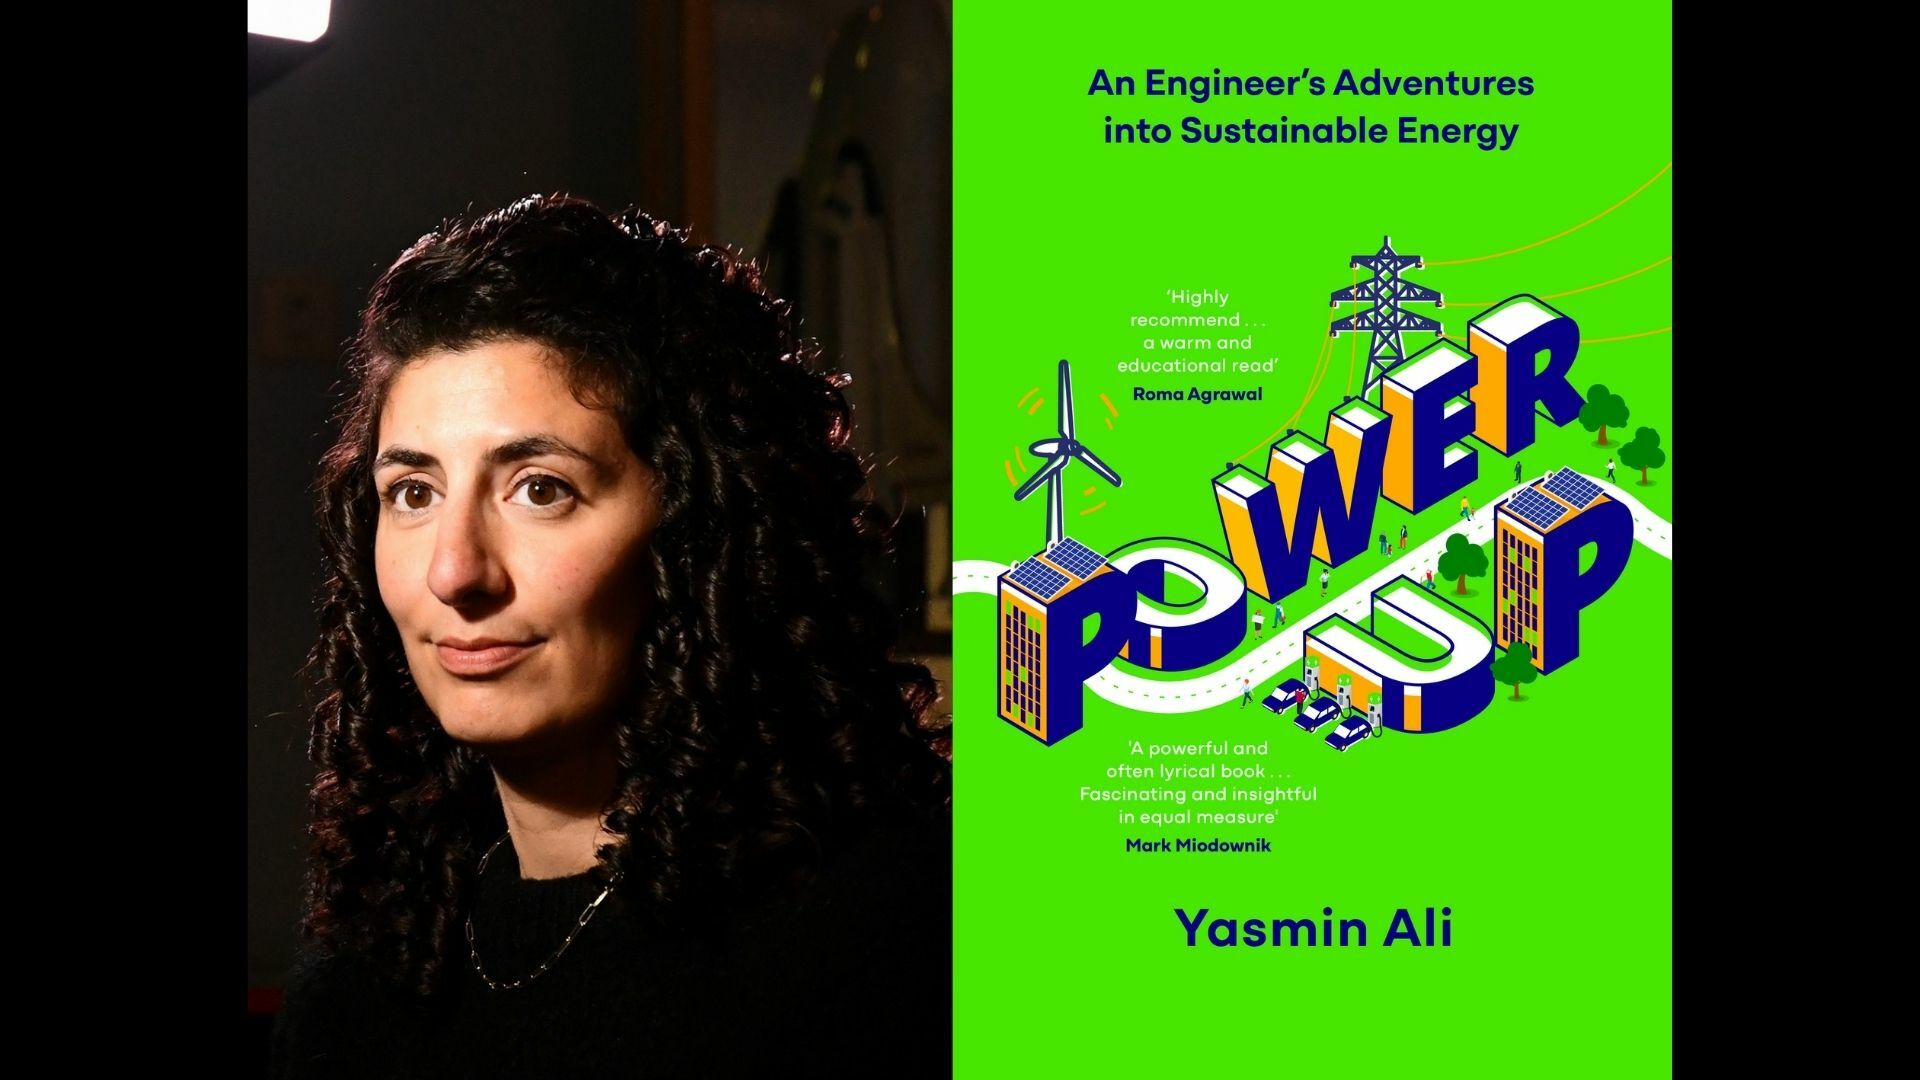 Power Up - An Engineer's Adventure into Sustainable Energy